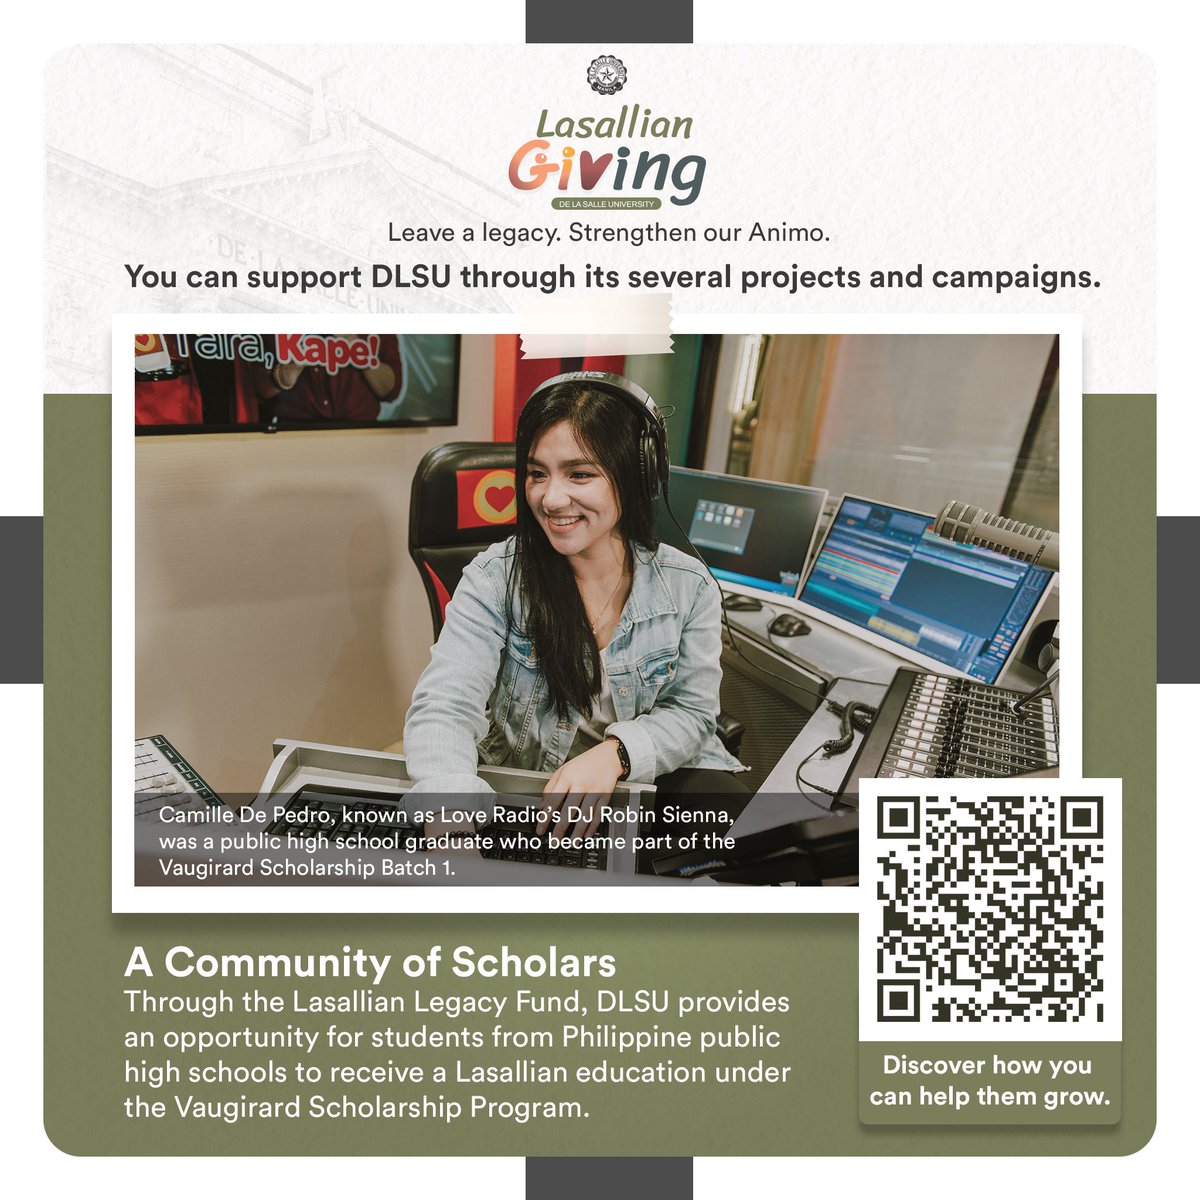 A Community of Scholars Through the Lasallian Legacy Fund, DLSU provides an opportunity for students from Philippine public high schools to receive a Lasallian education under the Vaugirard Scholarship Program. Discover how you can help them grow by scanning the QR code below.